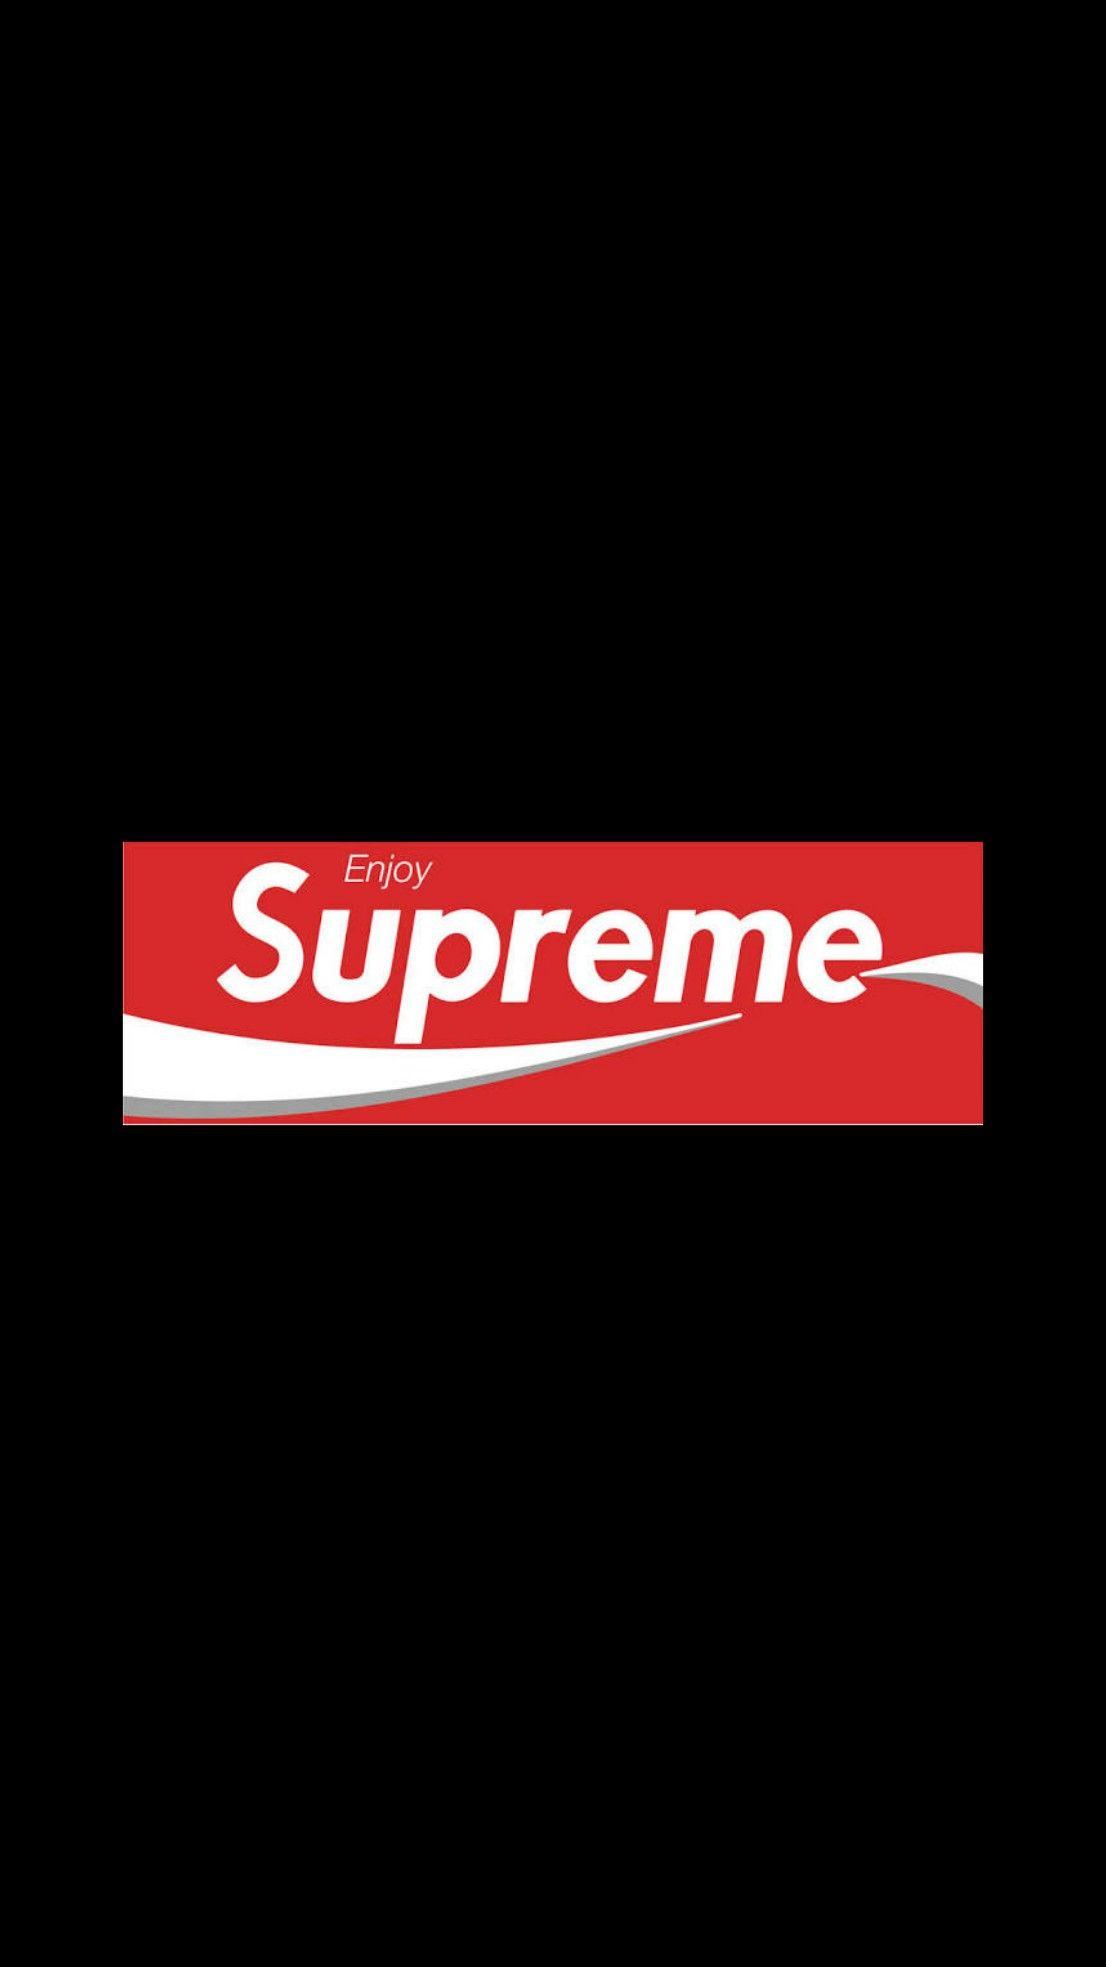 ▷ 1001+ ideas For a Cool and Fresh Supreme Wallpaper | Supreme iphone  wallpaper, Supreme wallpaper, Supreme wallpaper hd